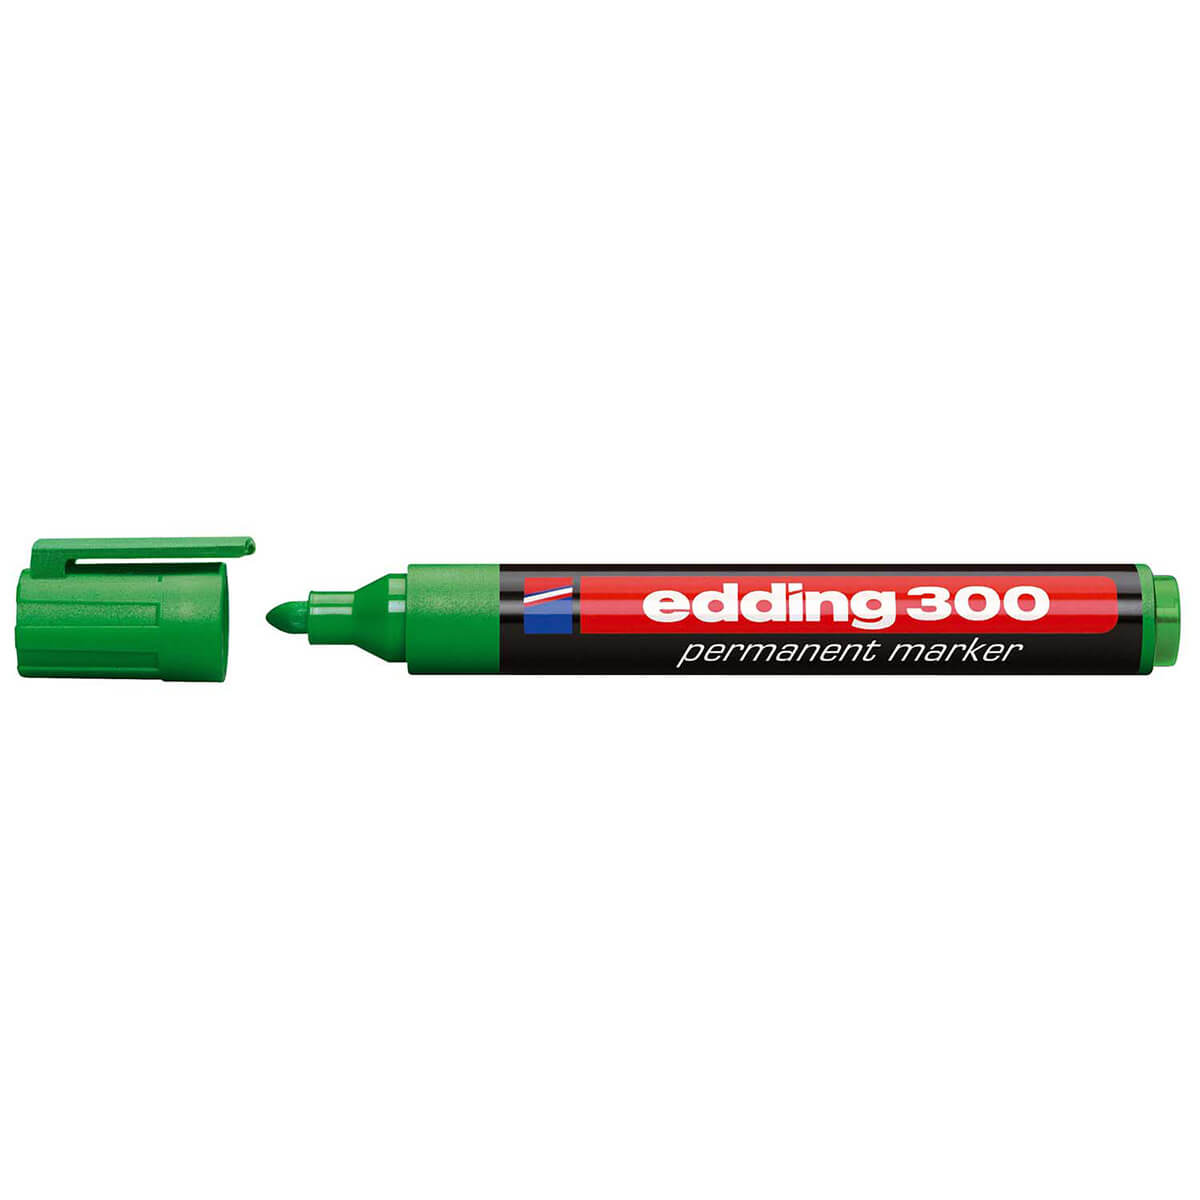 edding 300 permanent markers - refillable, 1.5 - 3 mm green